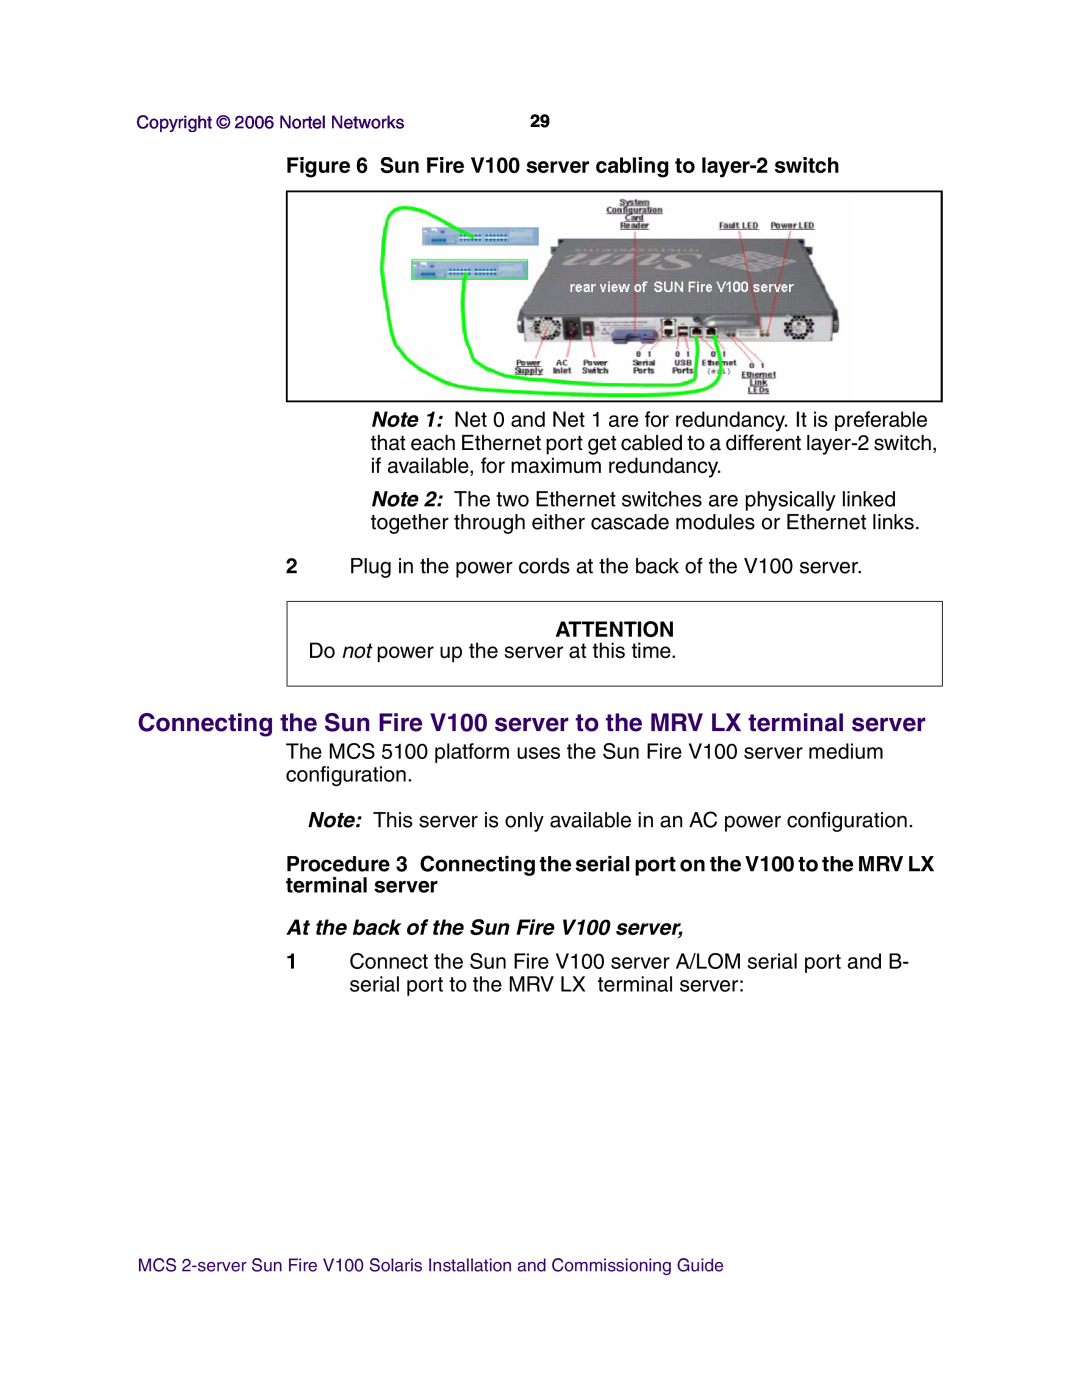 Nortel Networks manual Connecting the Sun Fire V100 server to the MRV LX terminal server 